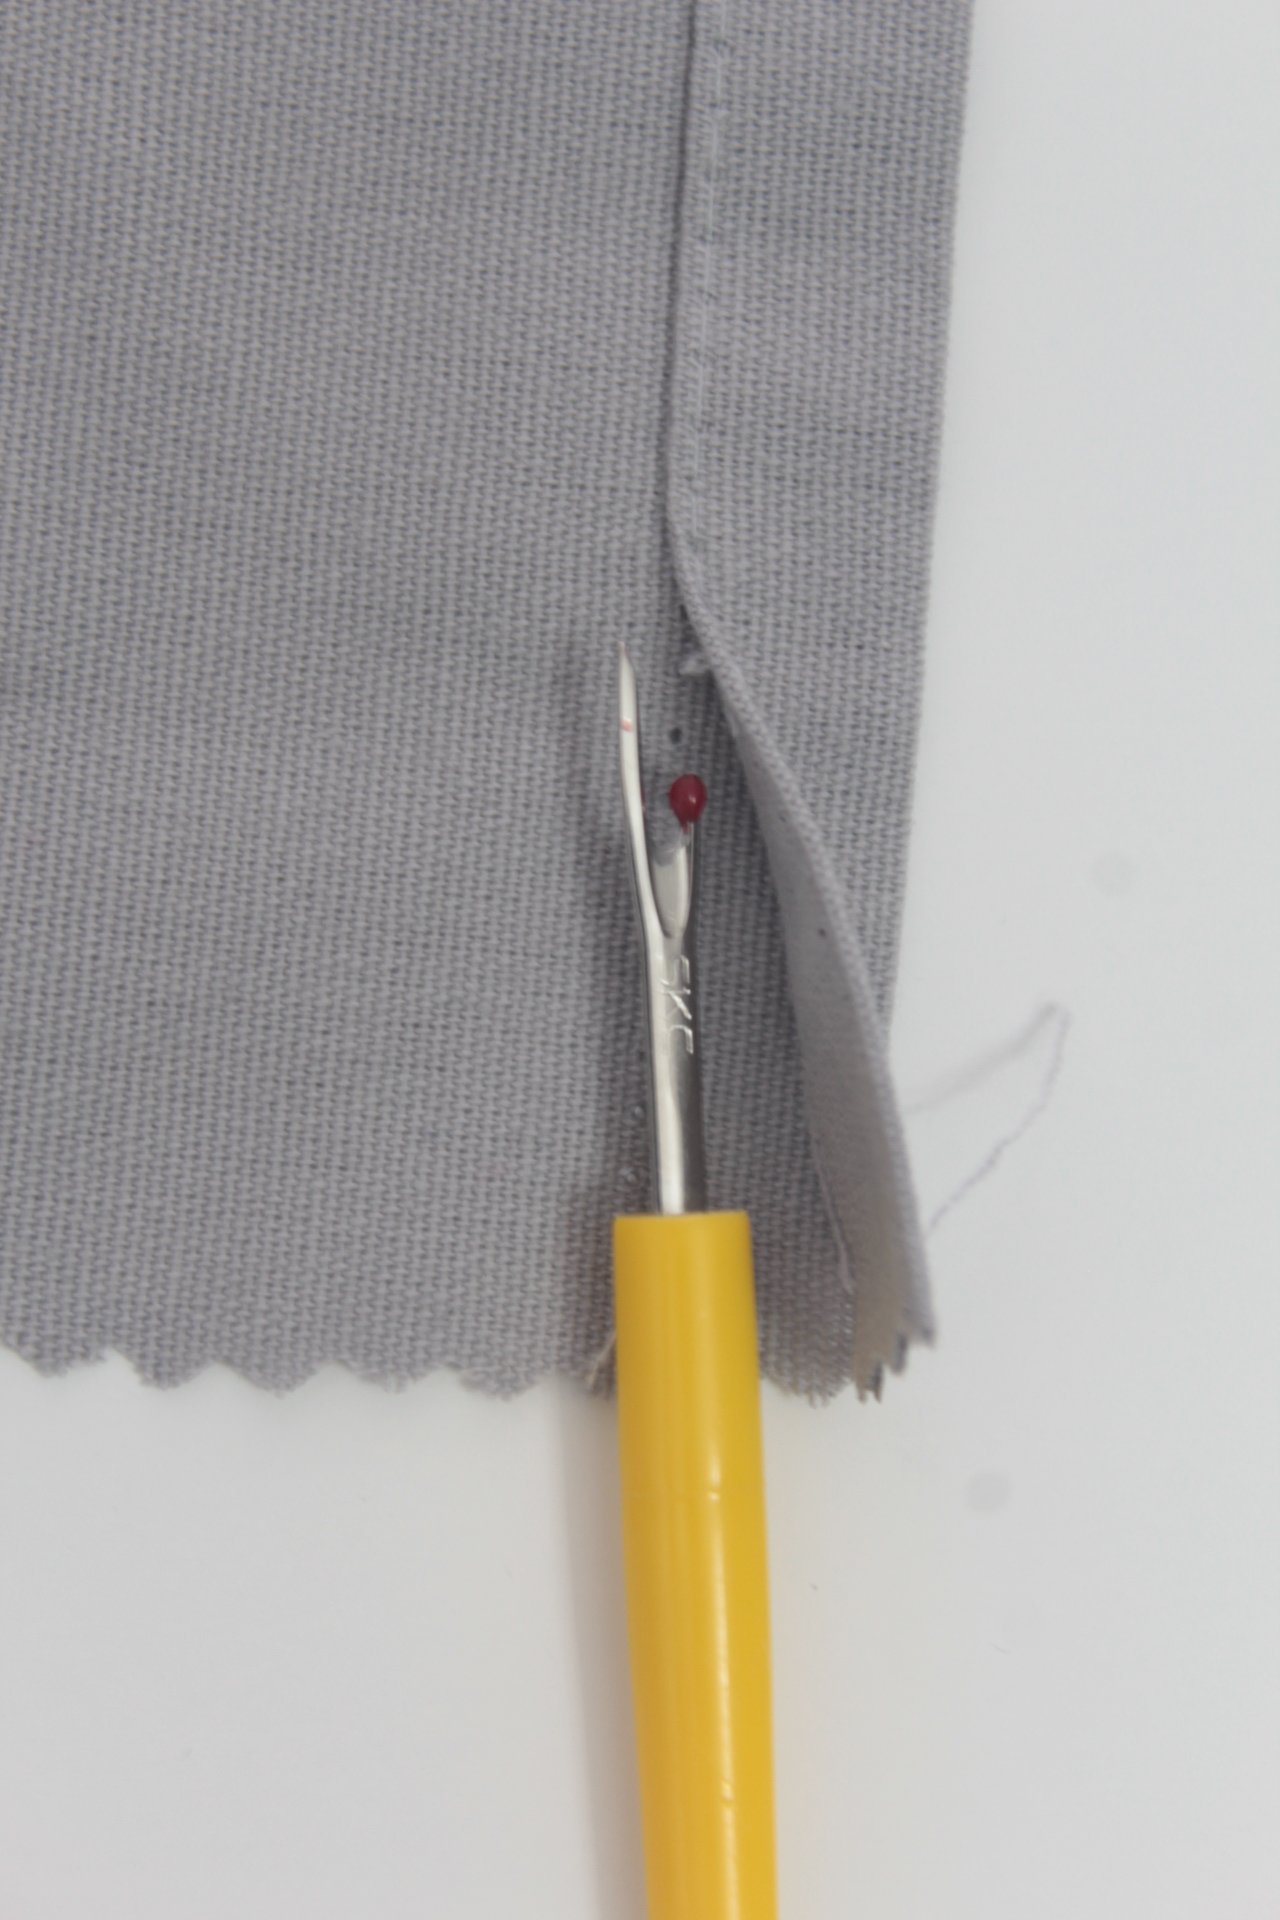 How to use a seam ripper correctly (and fast!) - Cucicucicoo